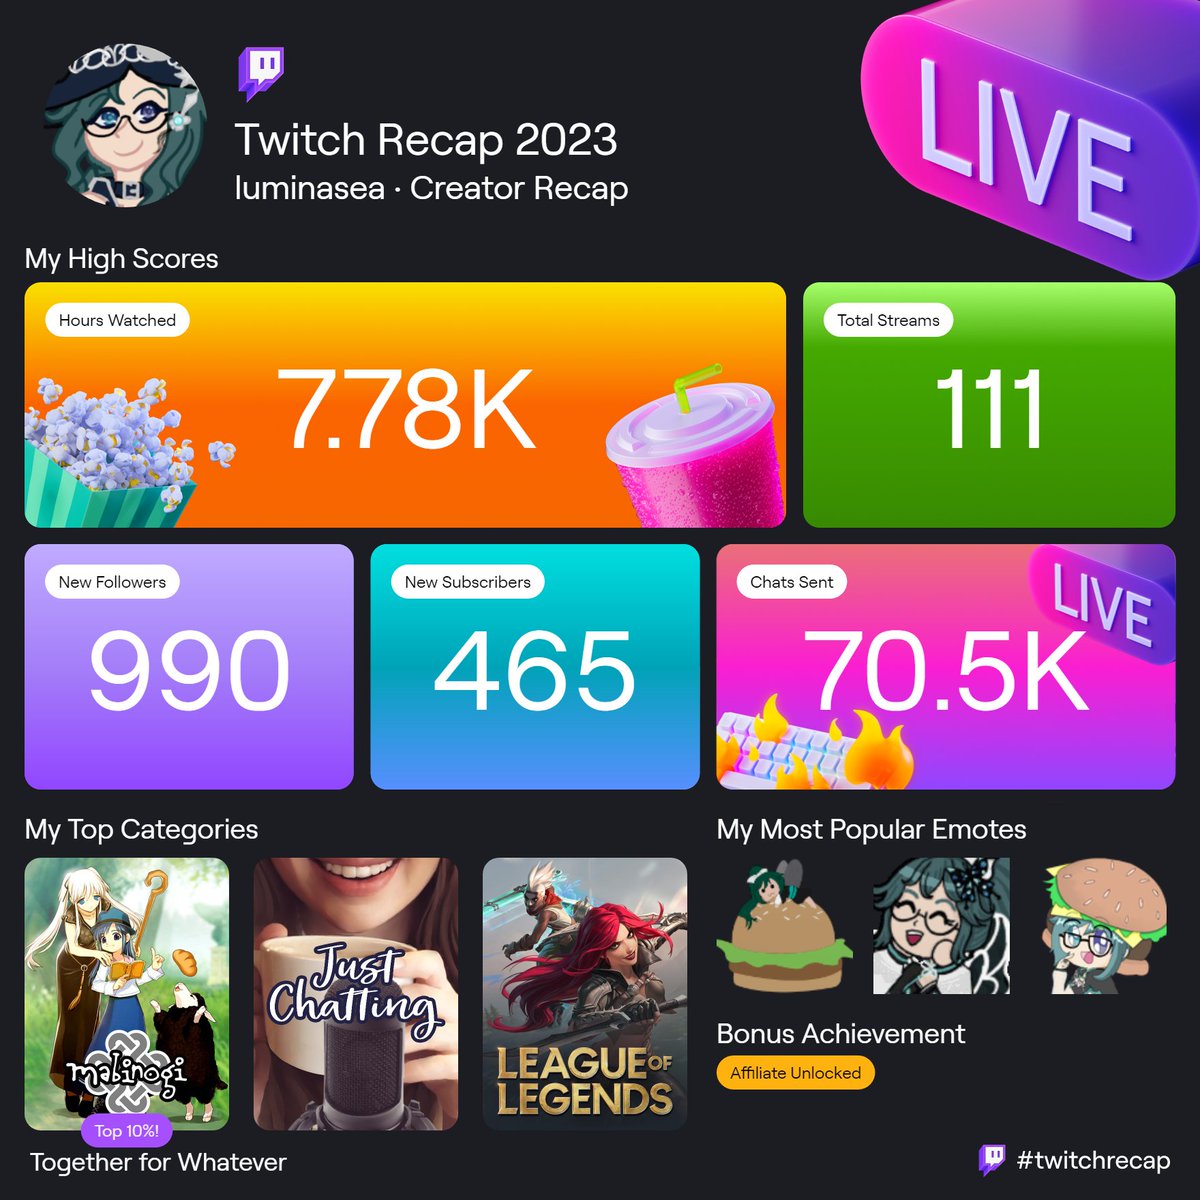 GUUUYS...😭 This is so INSANE to me!
I started streaming on January 3rd of this year.
I have met so MANY incredible people and been given so much love a support. It goes beyond words for me...

So all I can really say is:
Thank you, truly, with all my heart!🥹💕
#TwitchRecap2023